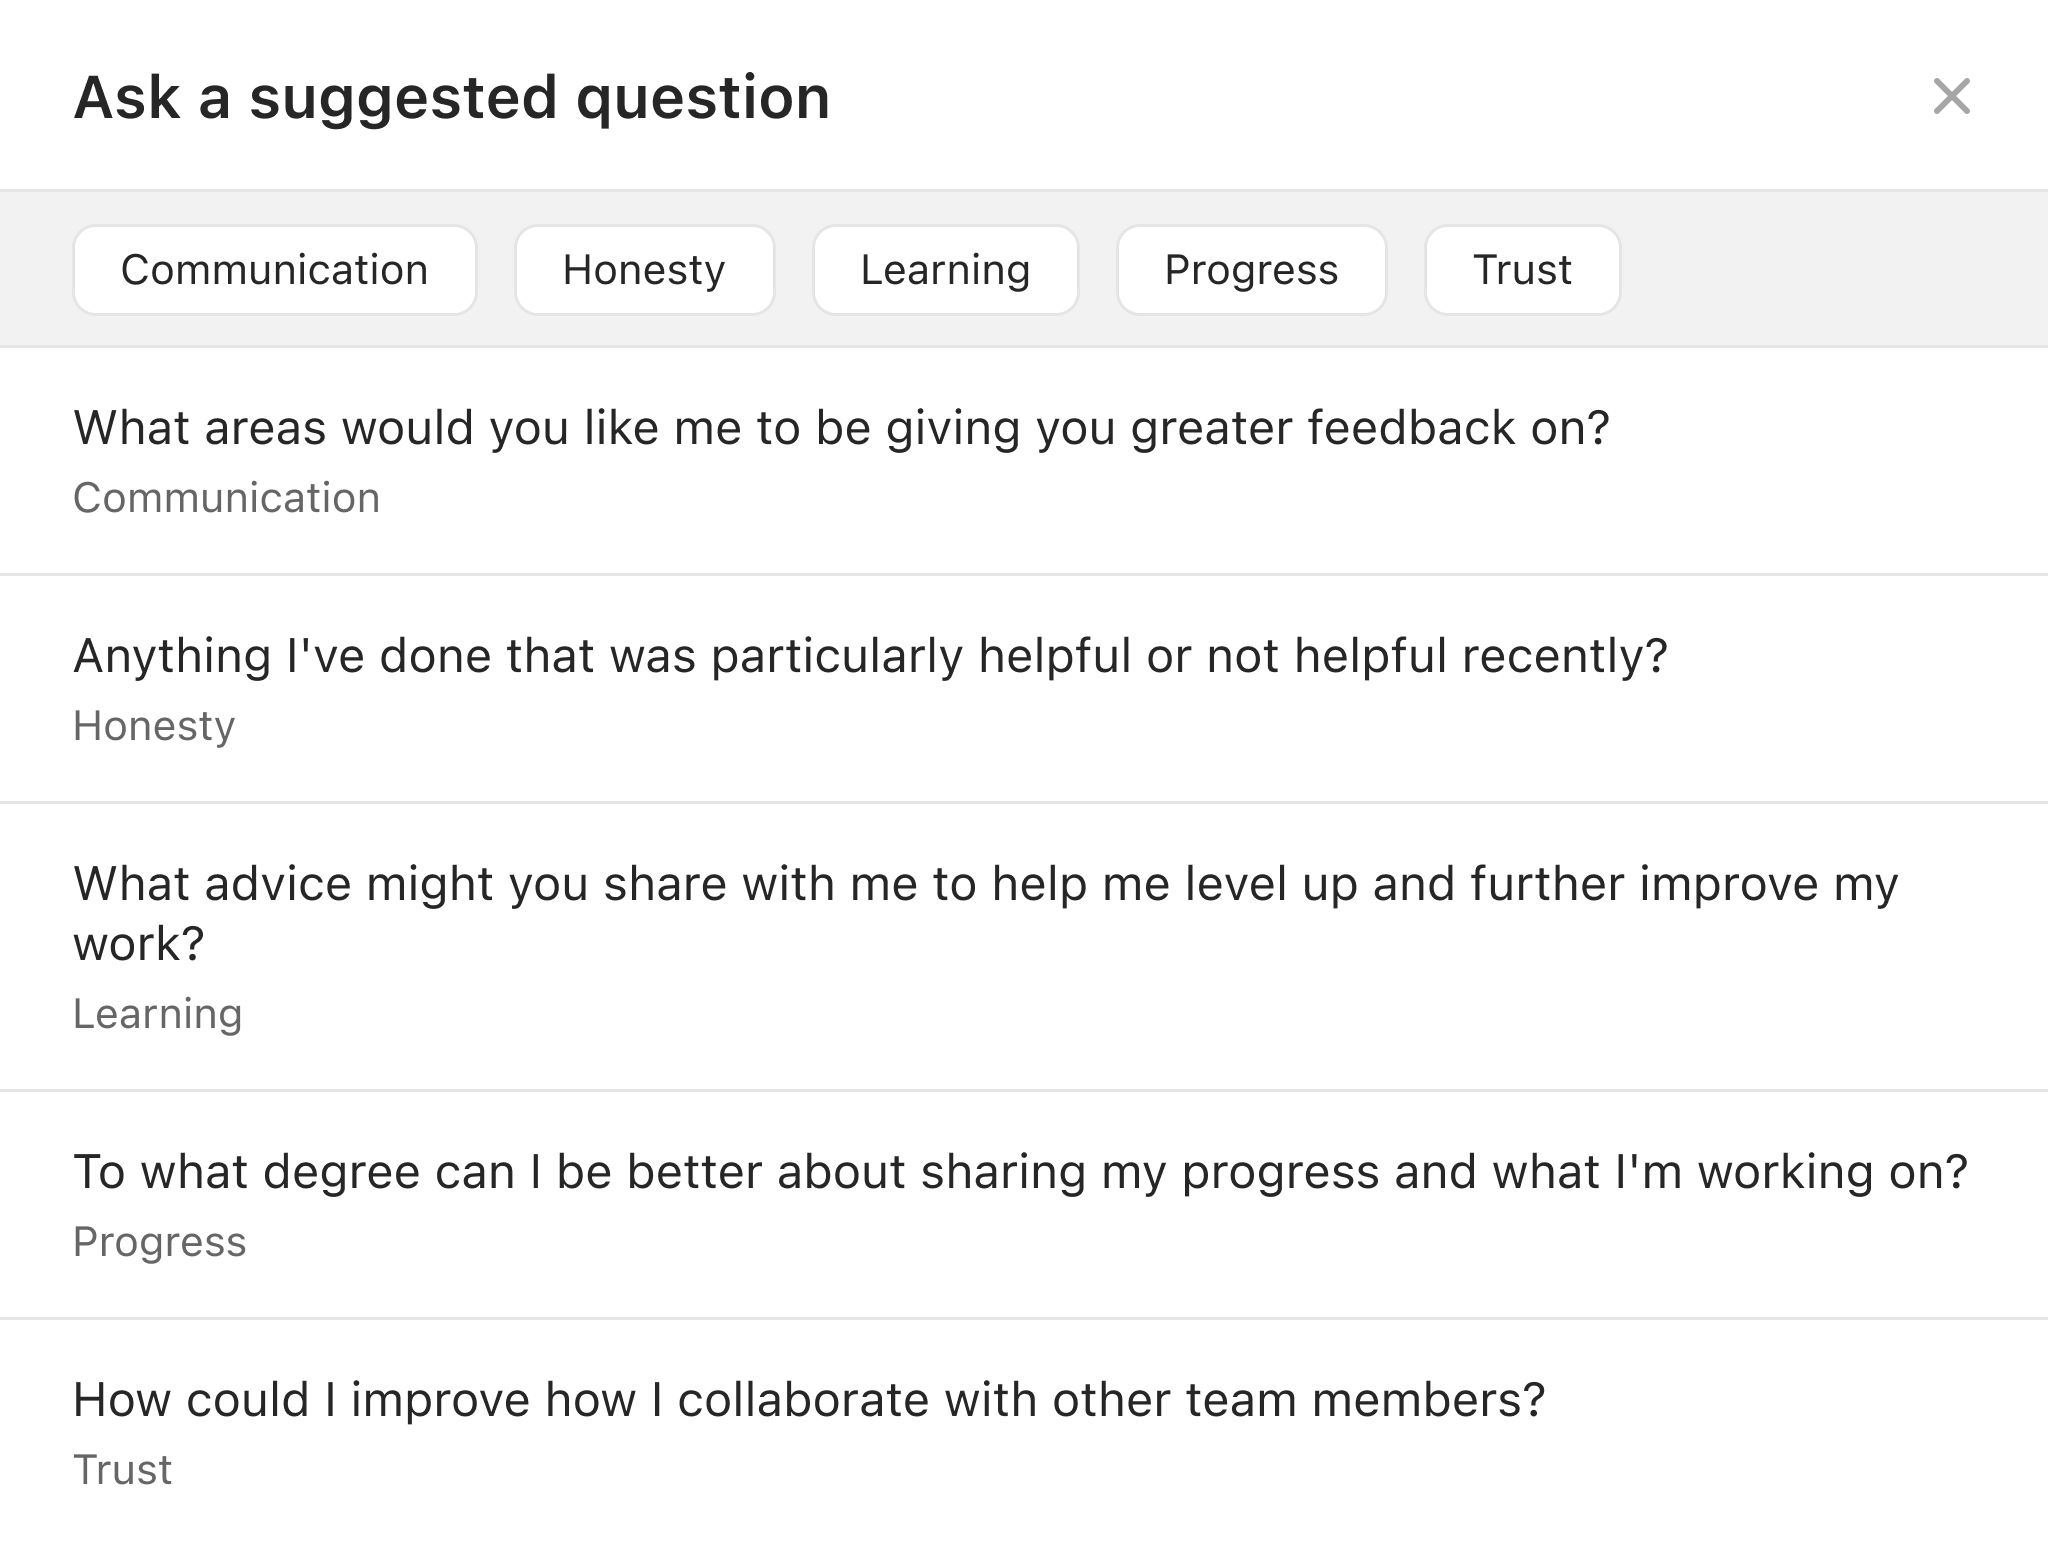 Choosing a suggested question template